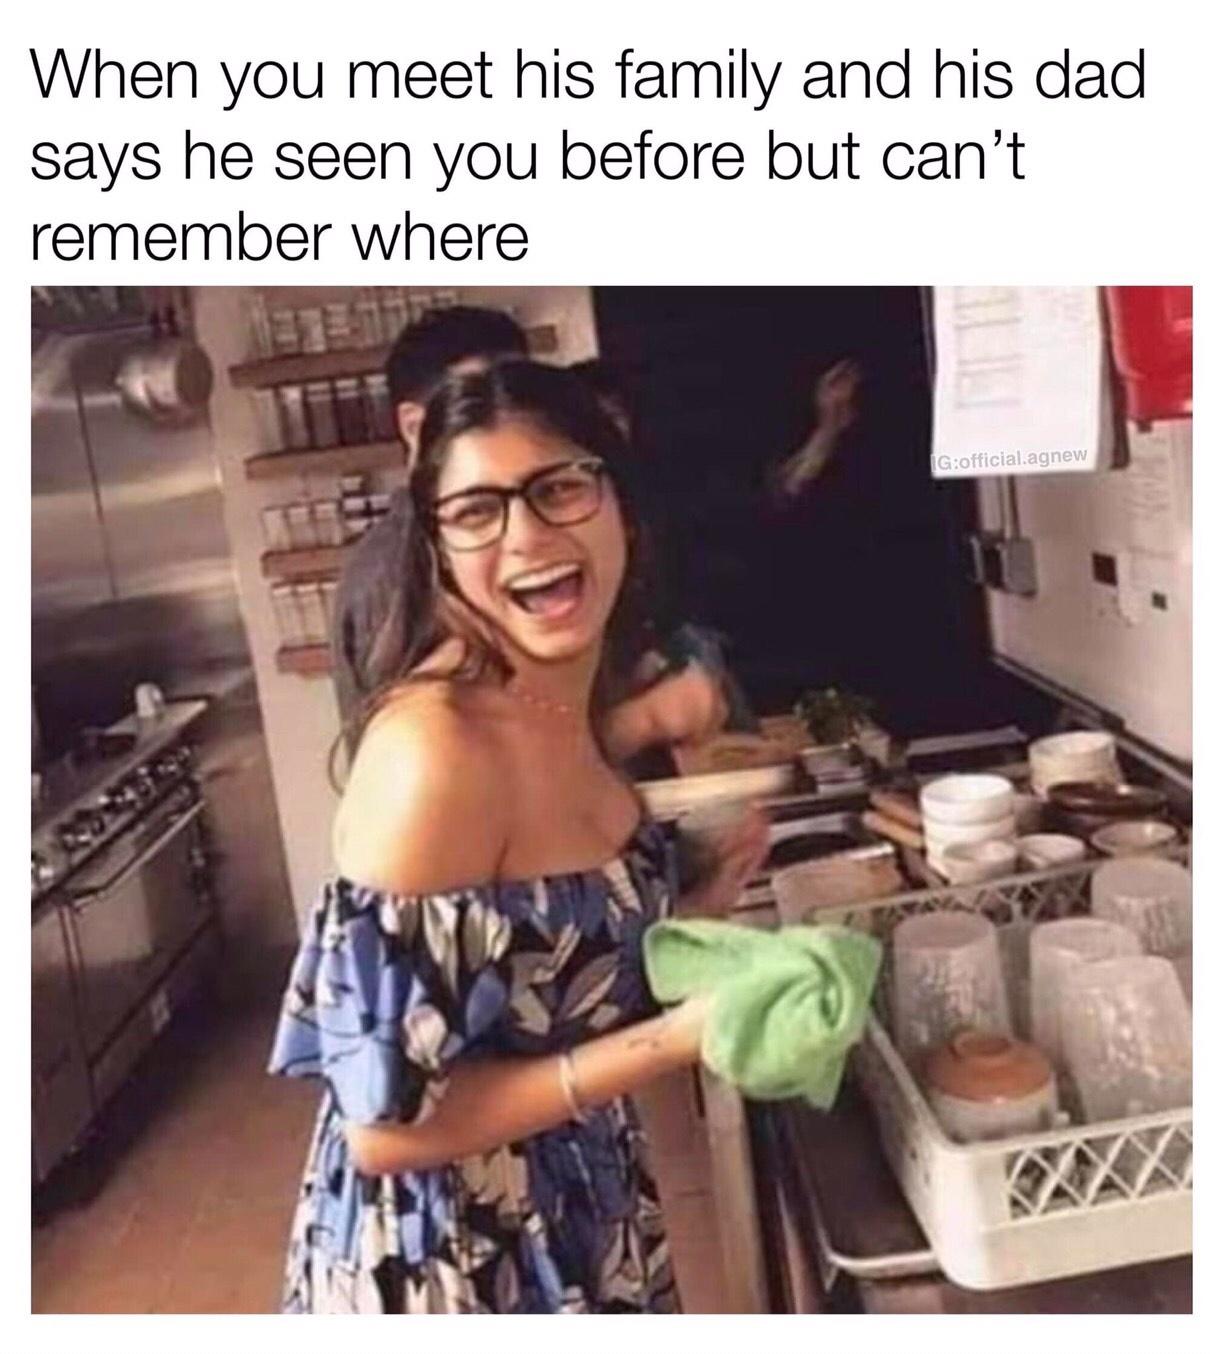 monday morning randomness - shes a keeper meme - When you meet his family and his dad says he seen you before but can't remember where Igofficial.agnew